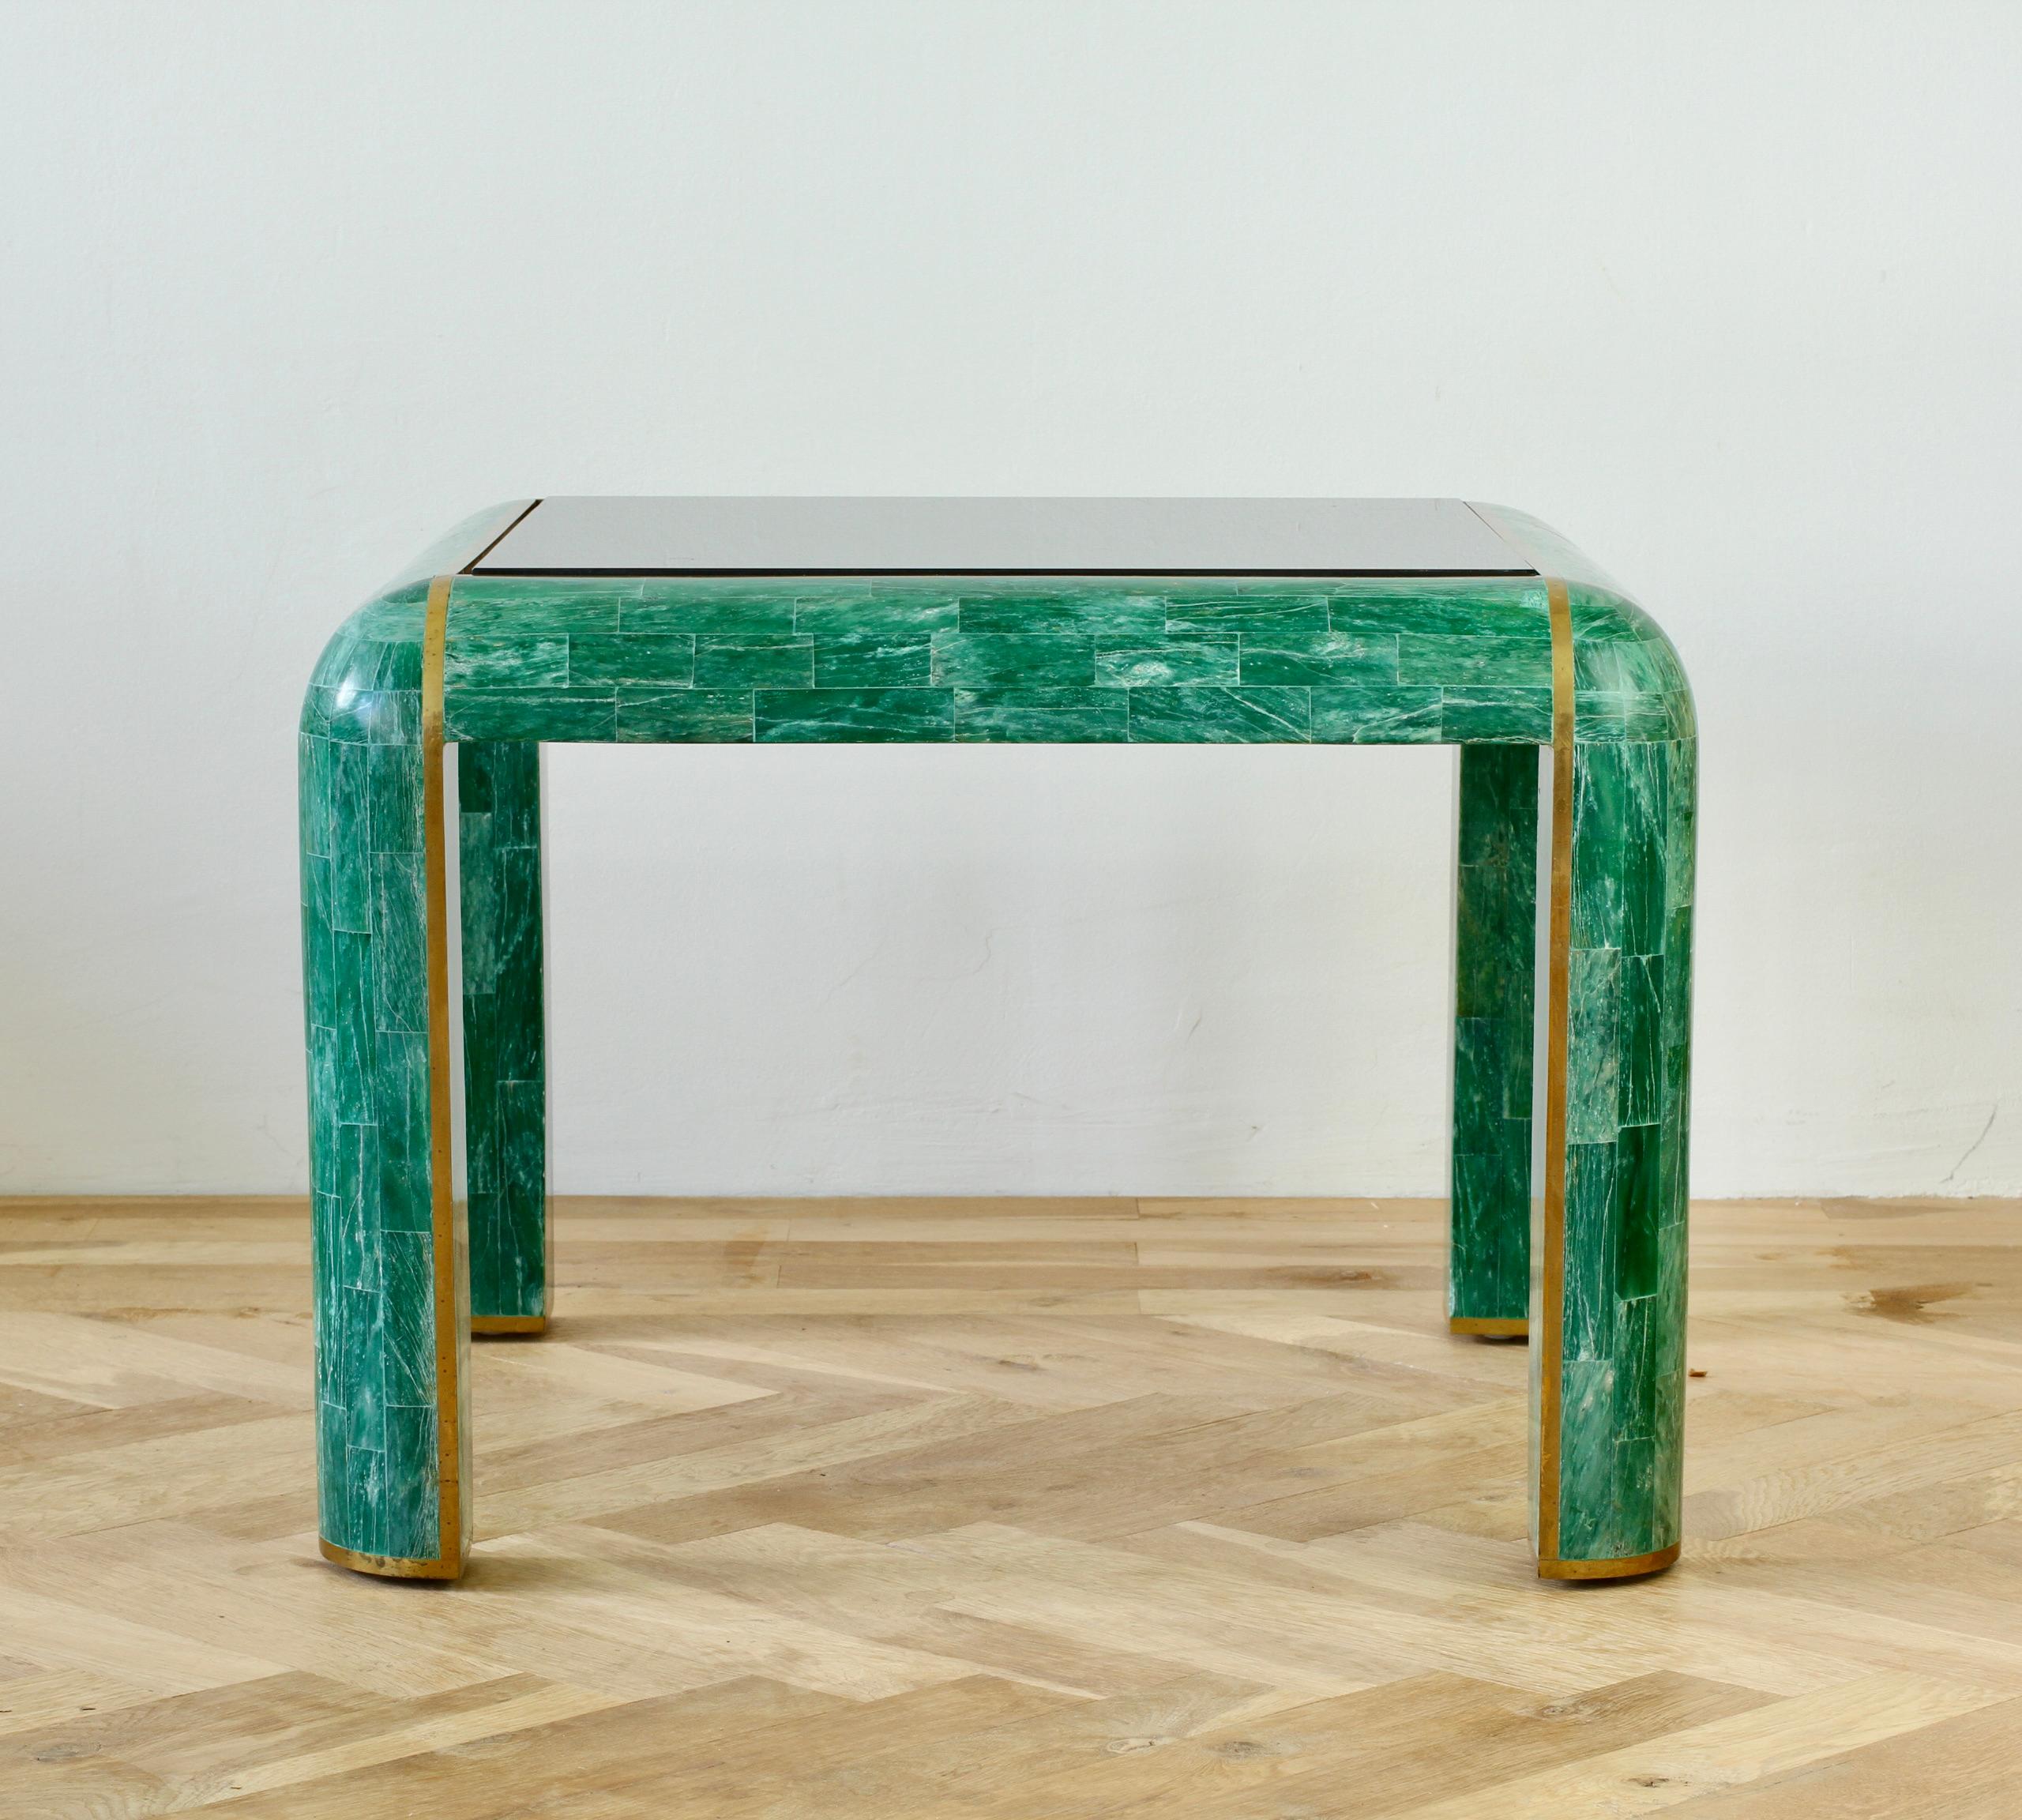 Stunning green tessellated stone and polished brass side, end or game table by Casa Bique, circa 1970s. The designer is unknown but these tables are often attributed to Maitland Smith and they certainly did produce similar items of such quality as